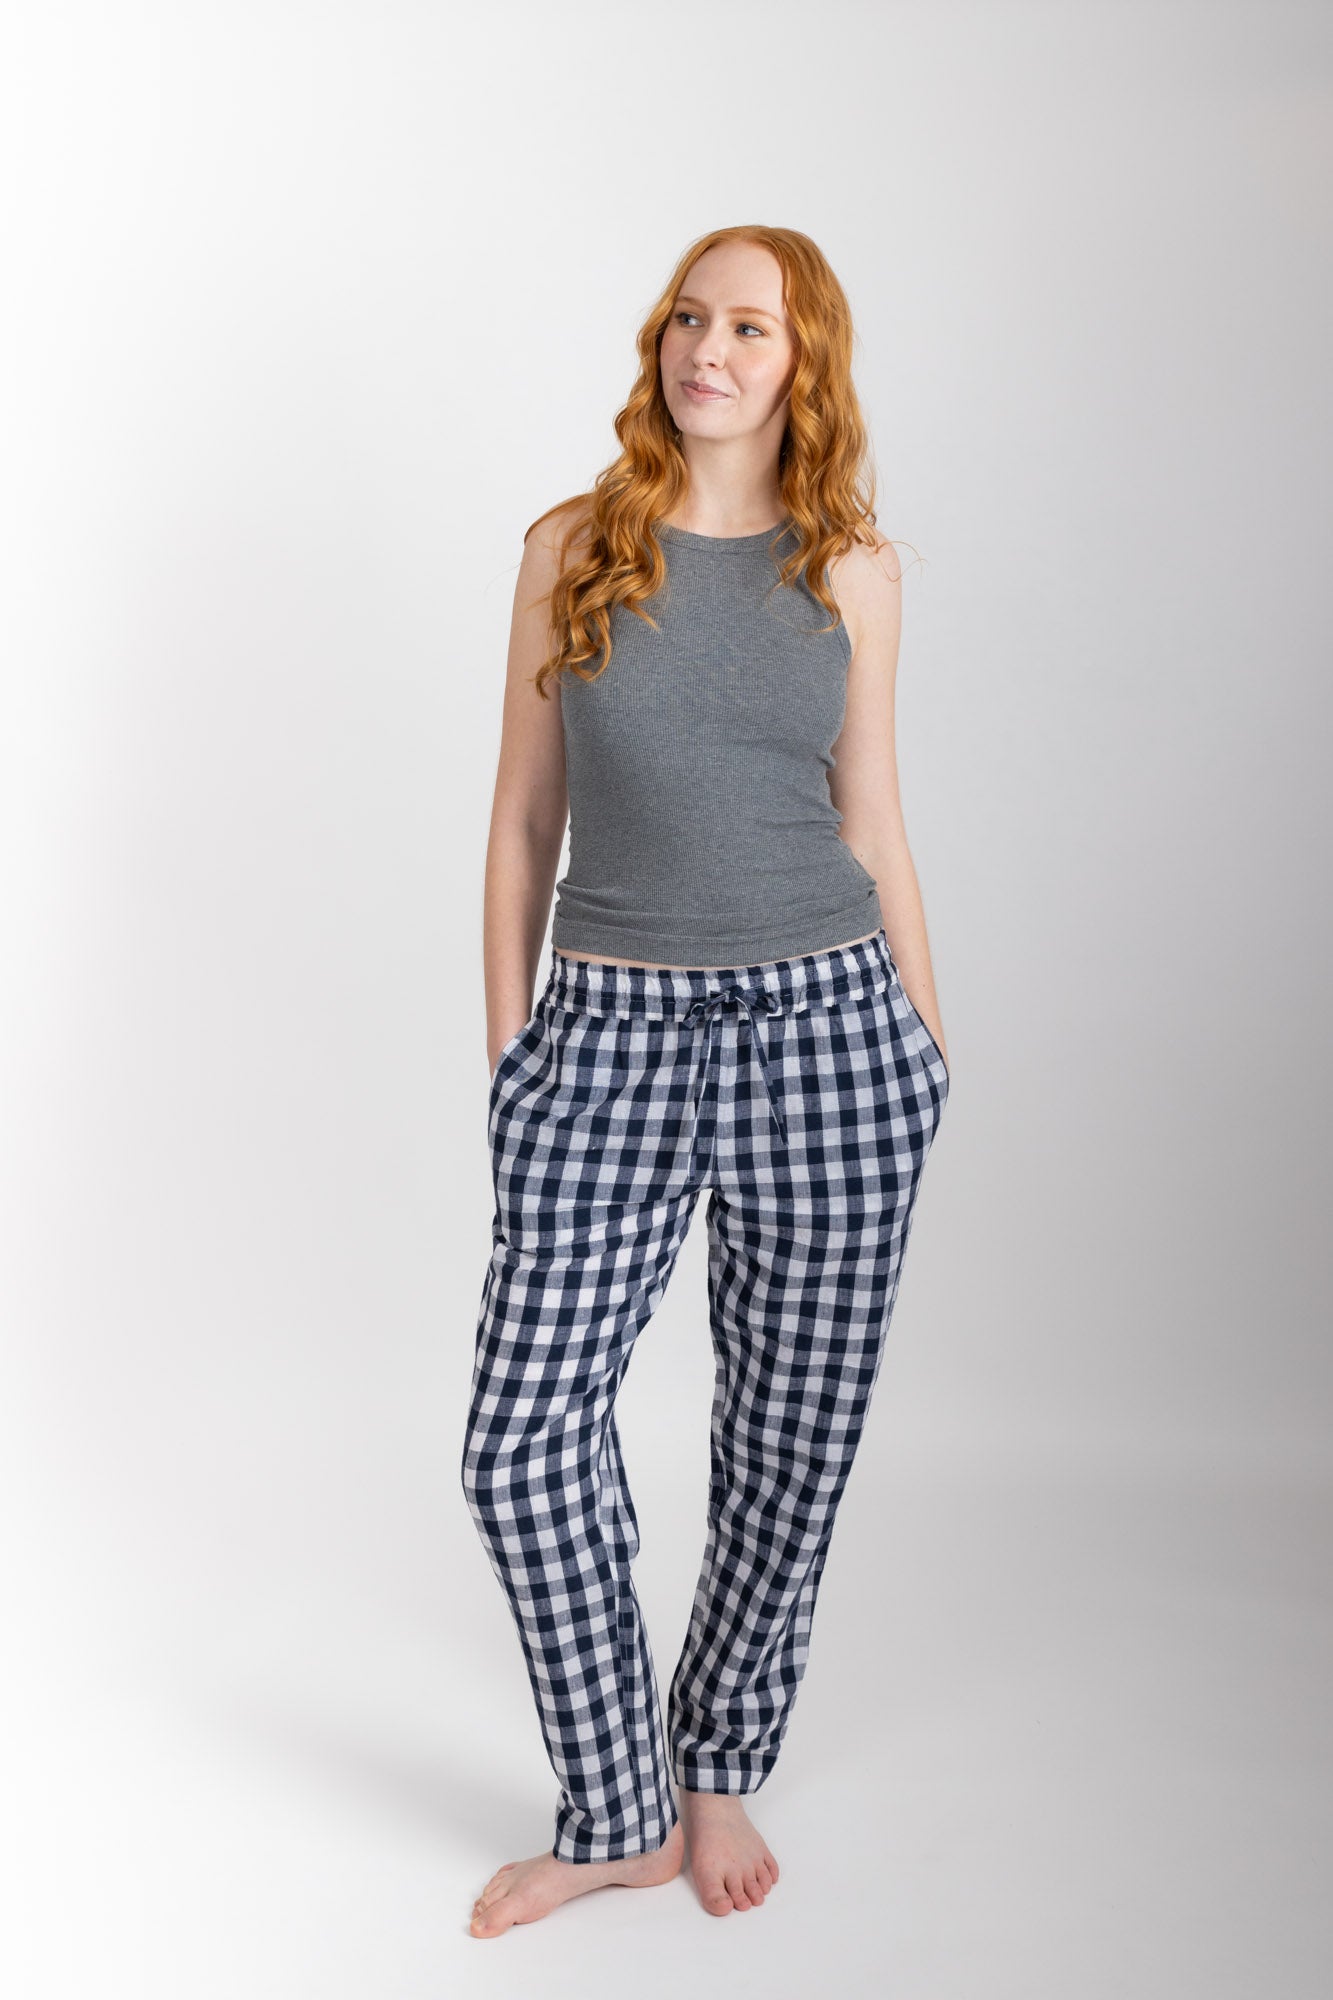 Women’s pyjama pant.  Made from an organic cotton and linen blend, in a Navy check.  These pants feature an elasticated waistband with a drawstring for comfort.